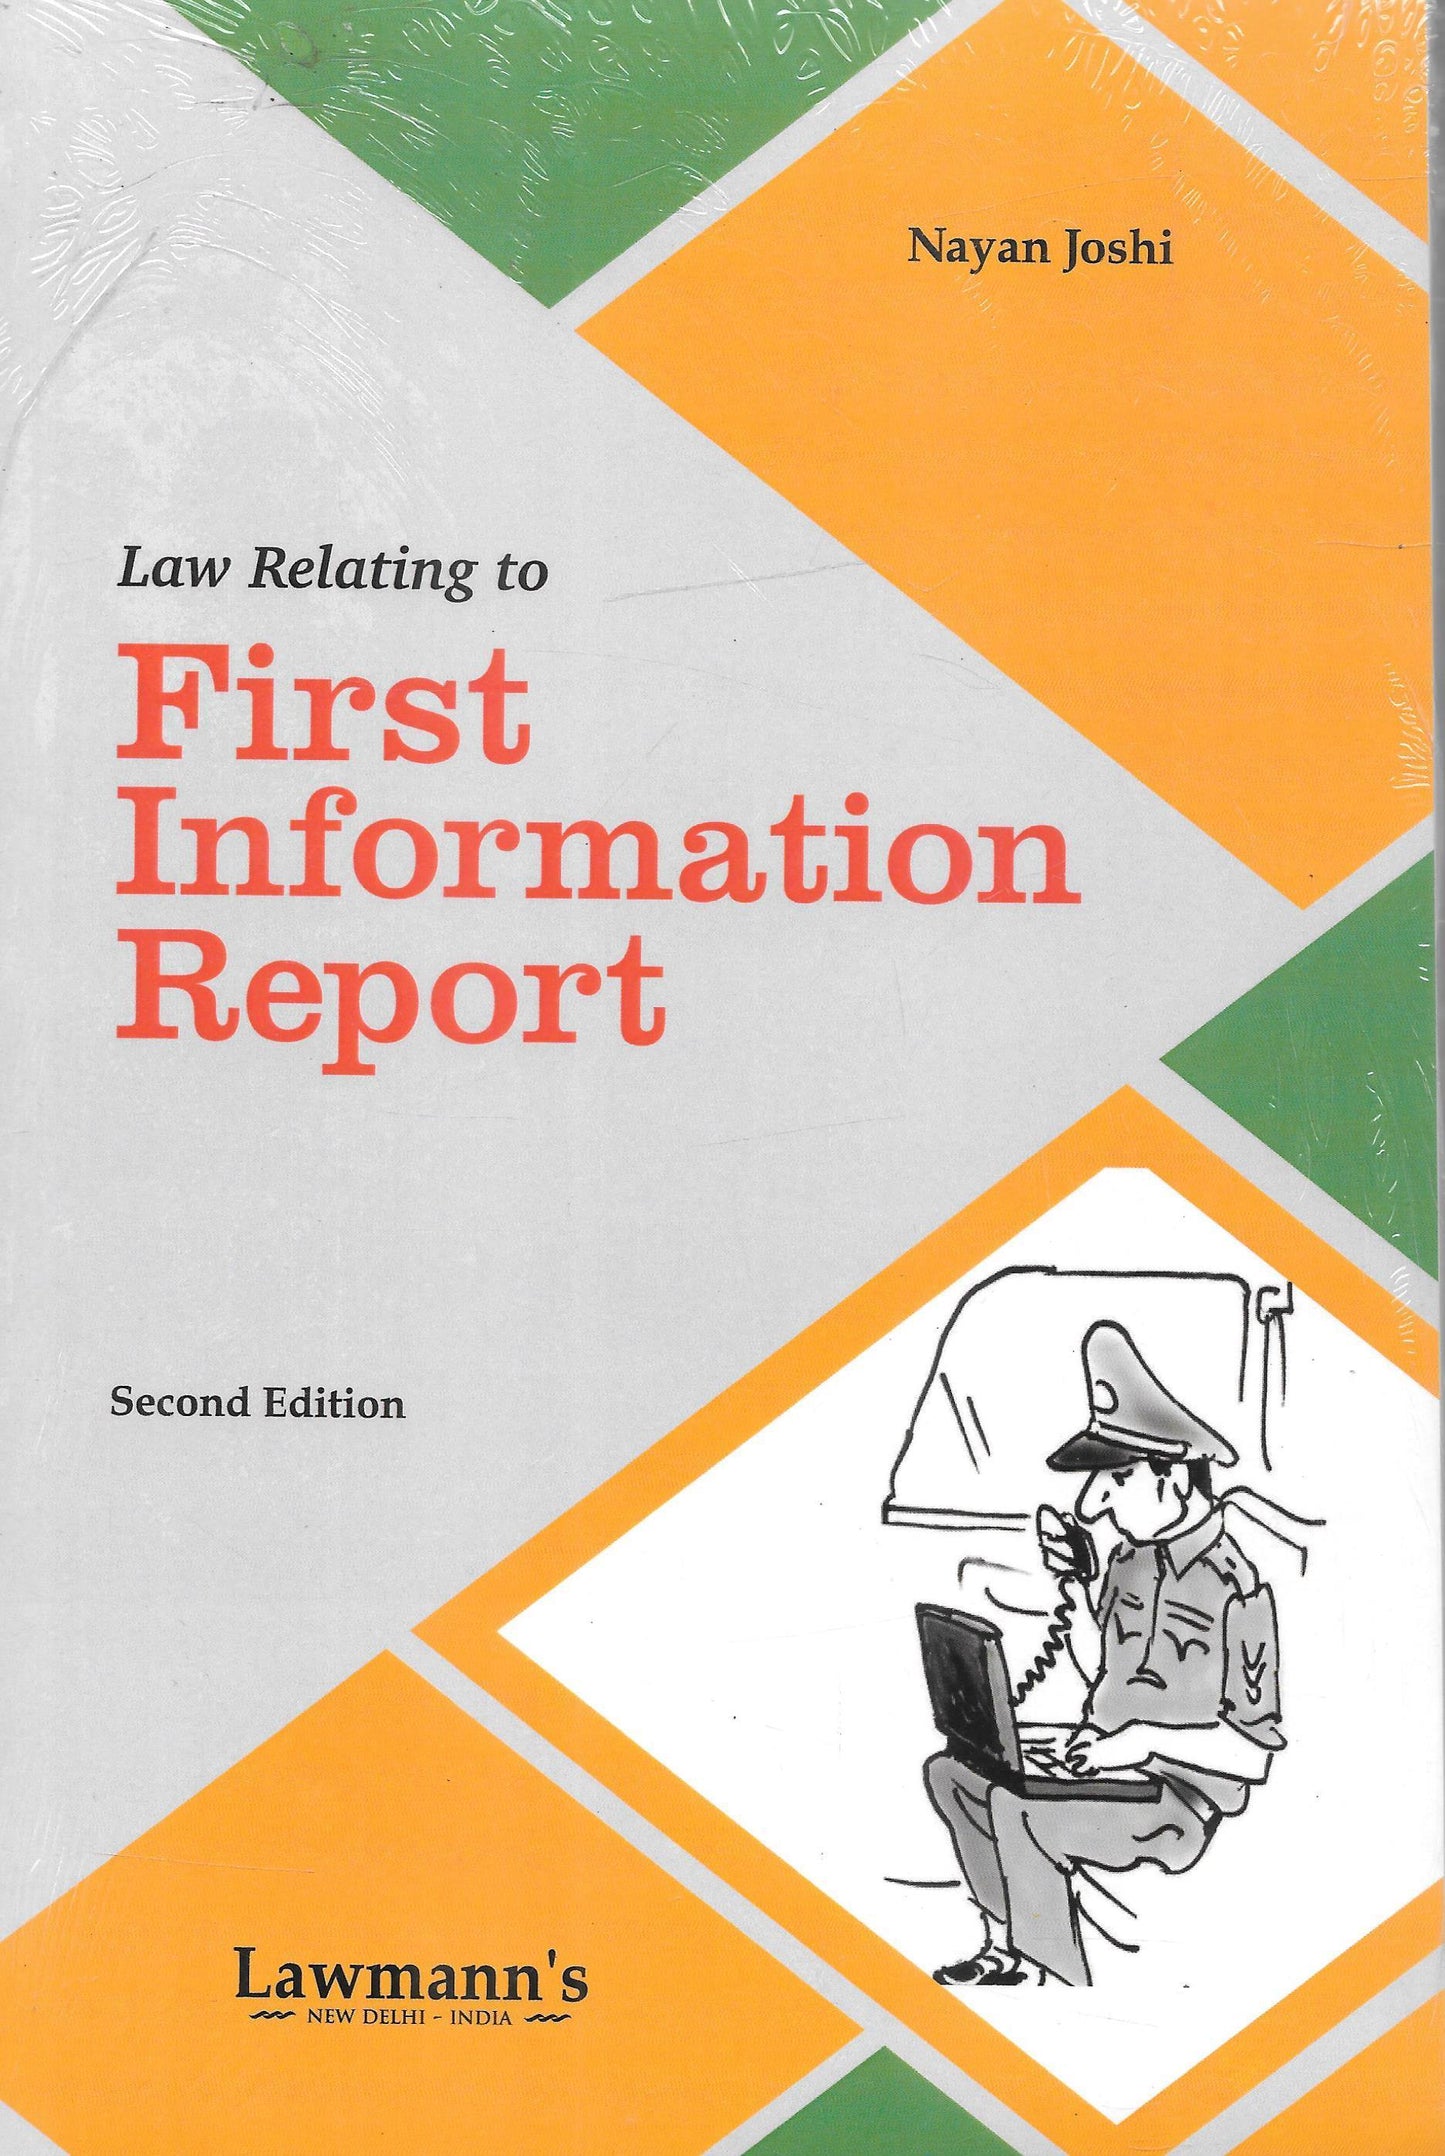 Law relating to First Information Report